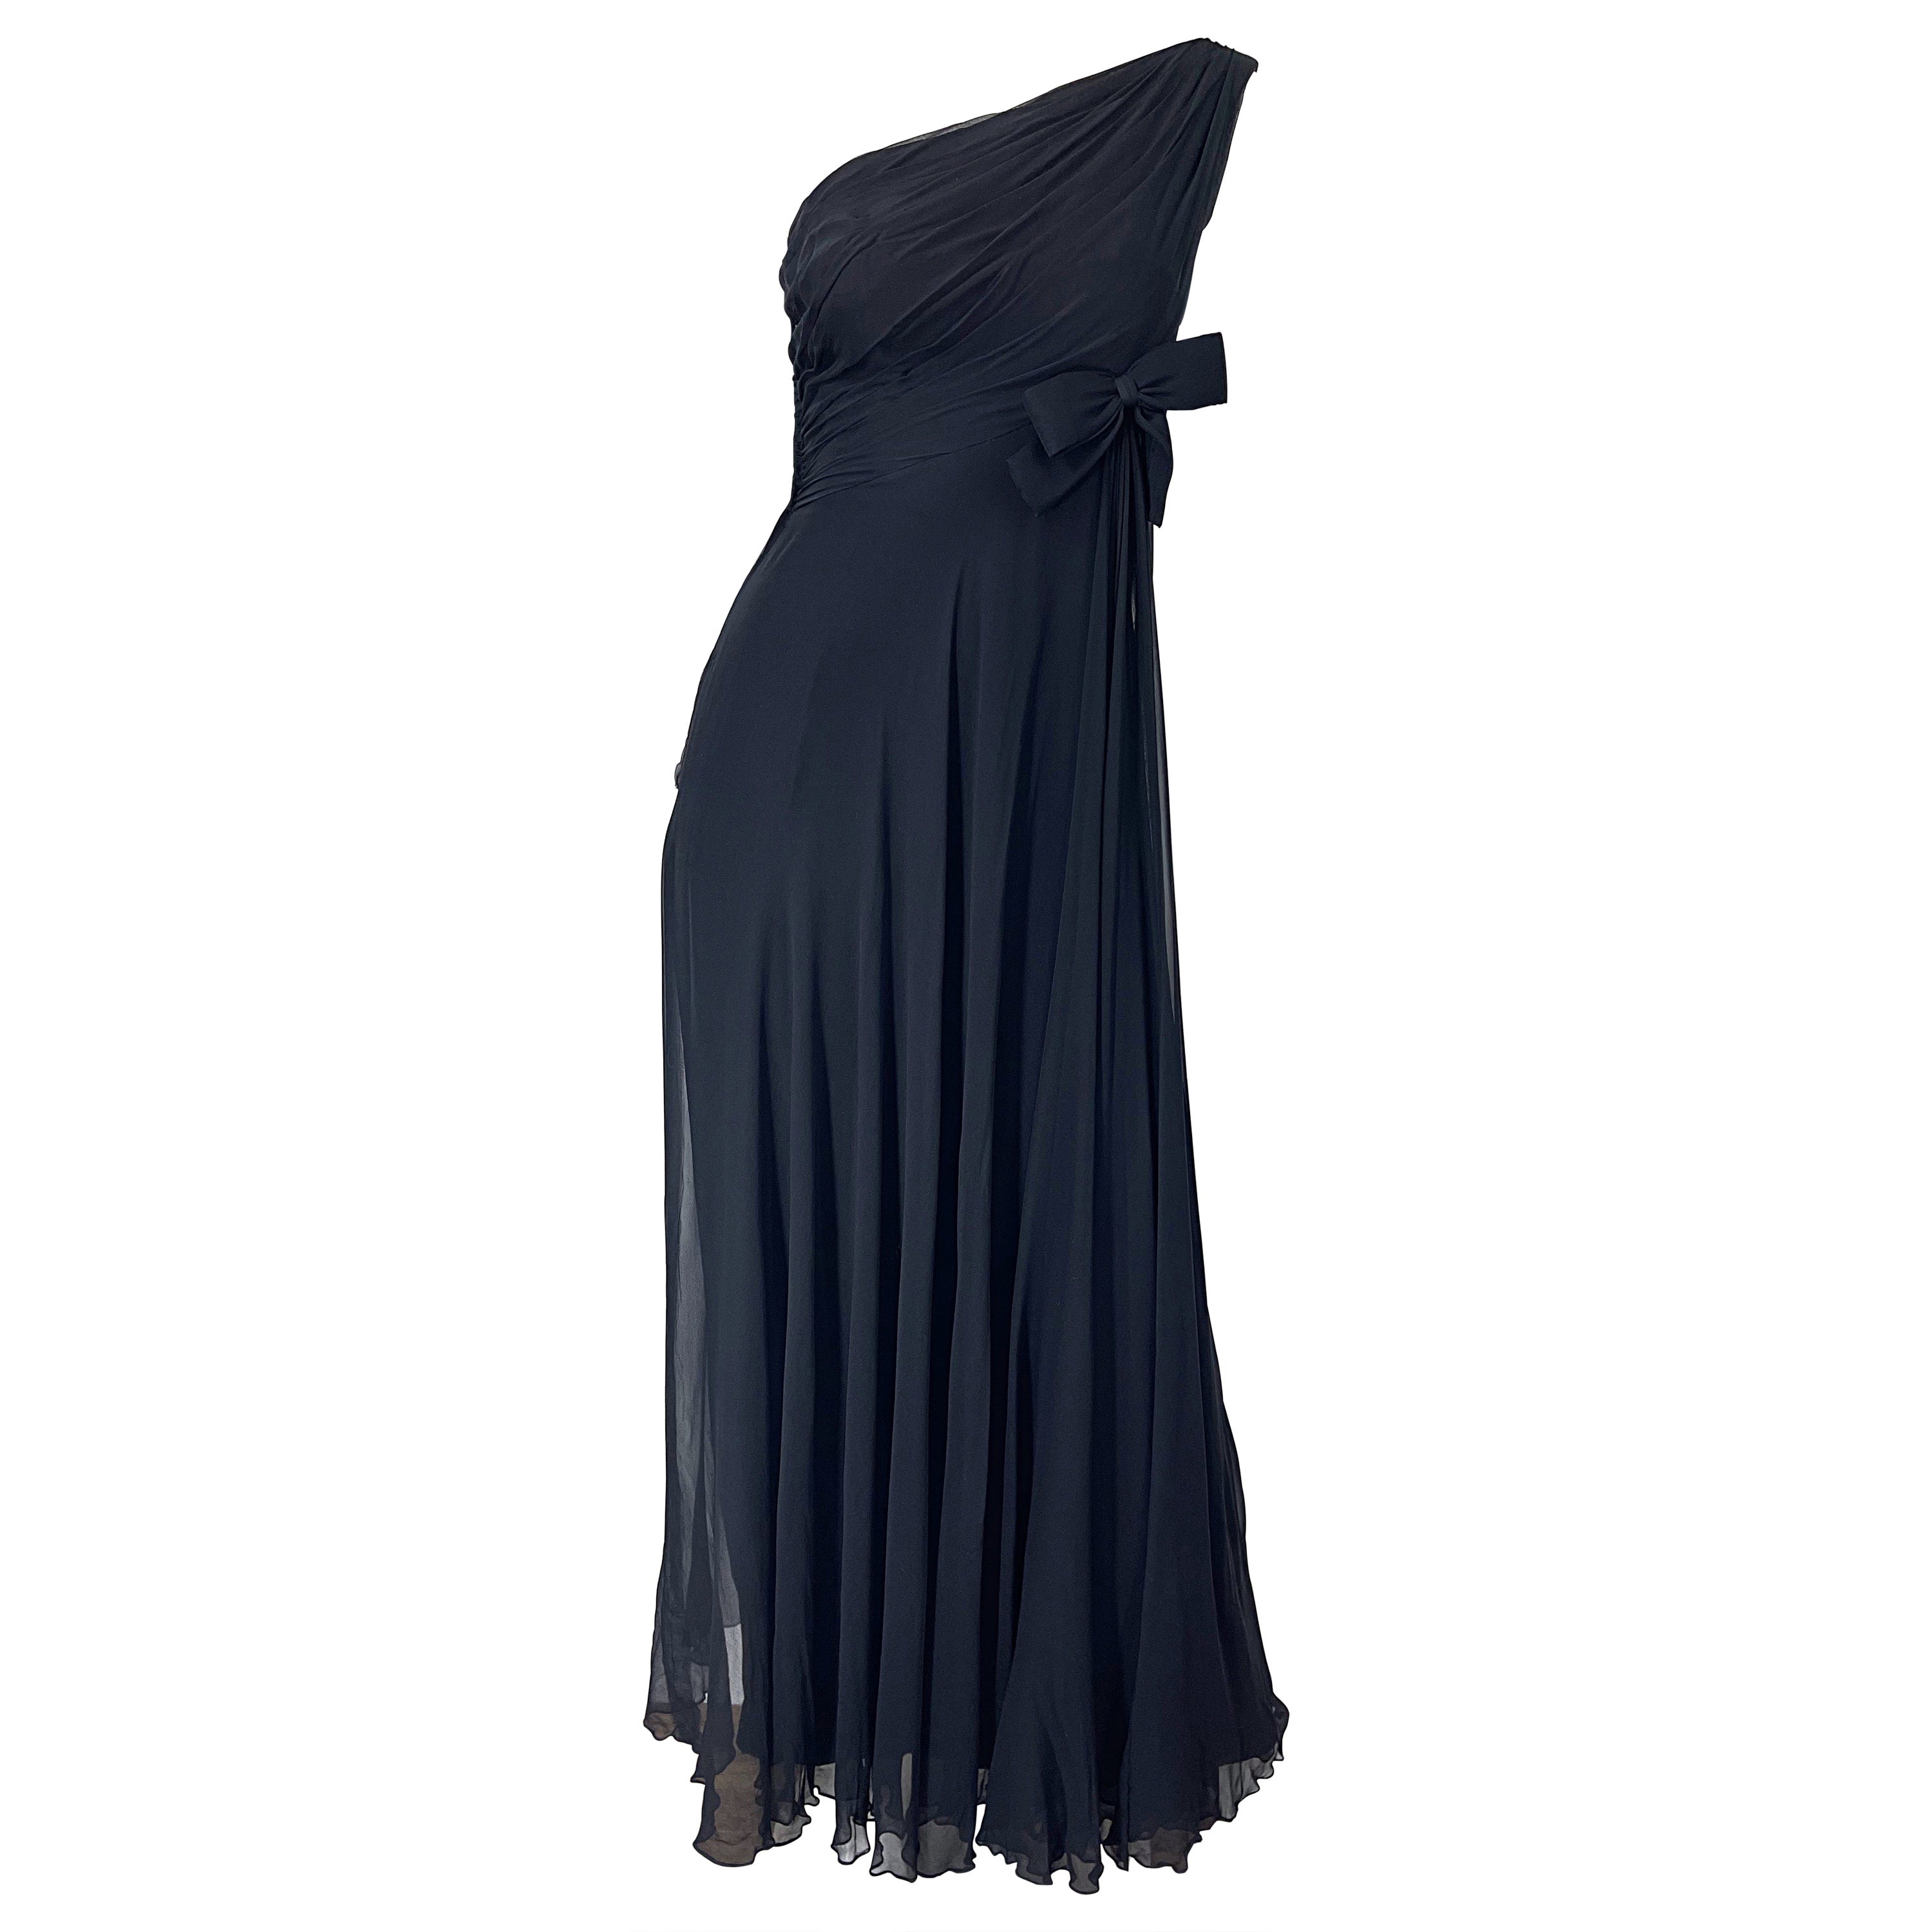 Malcolm Starr 1960s Black Silk Chiffon Grecian One Shoulder Vintage 60s Gown For Sale